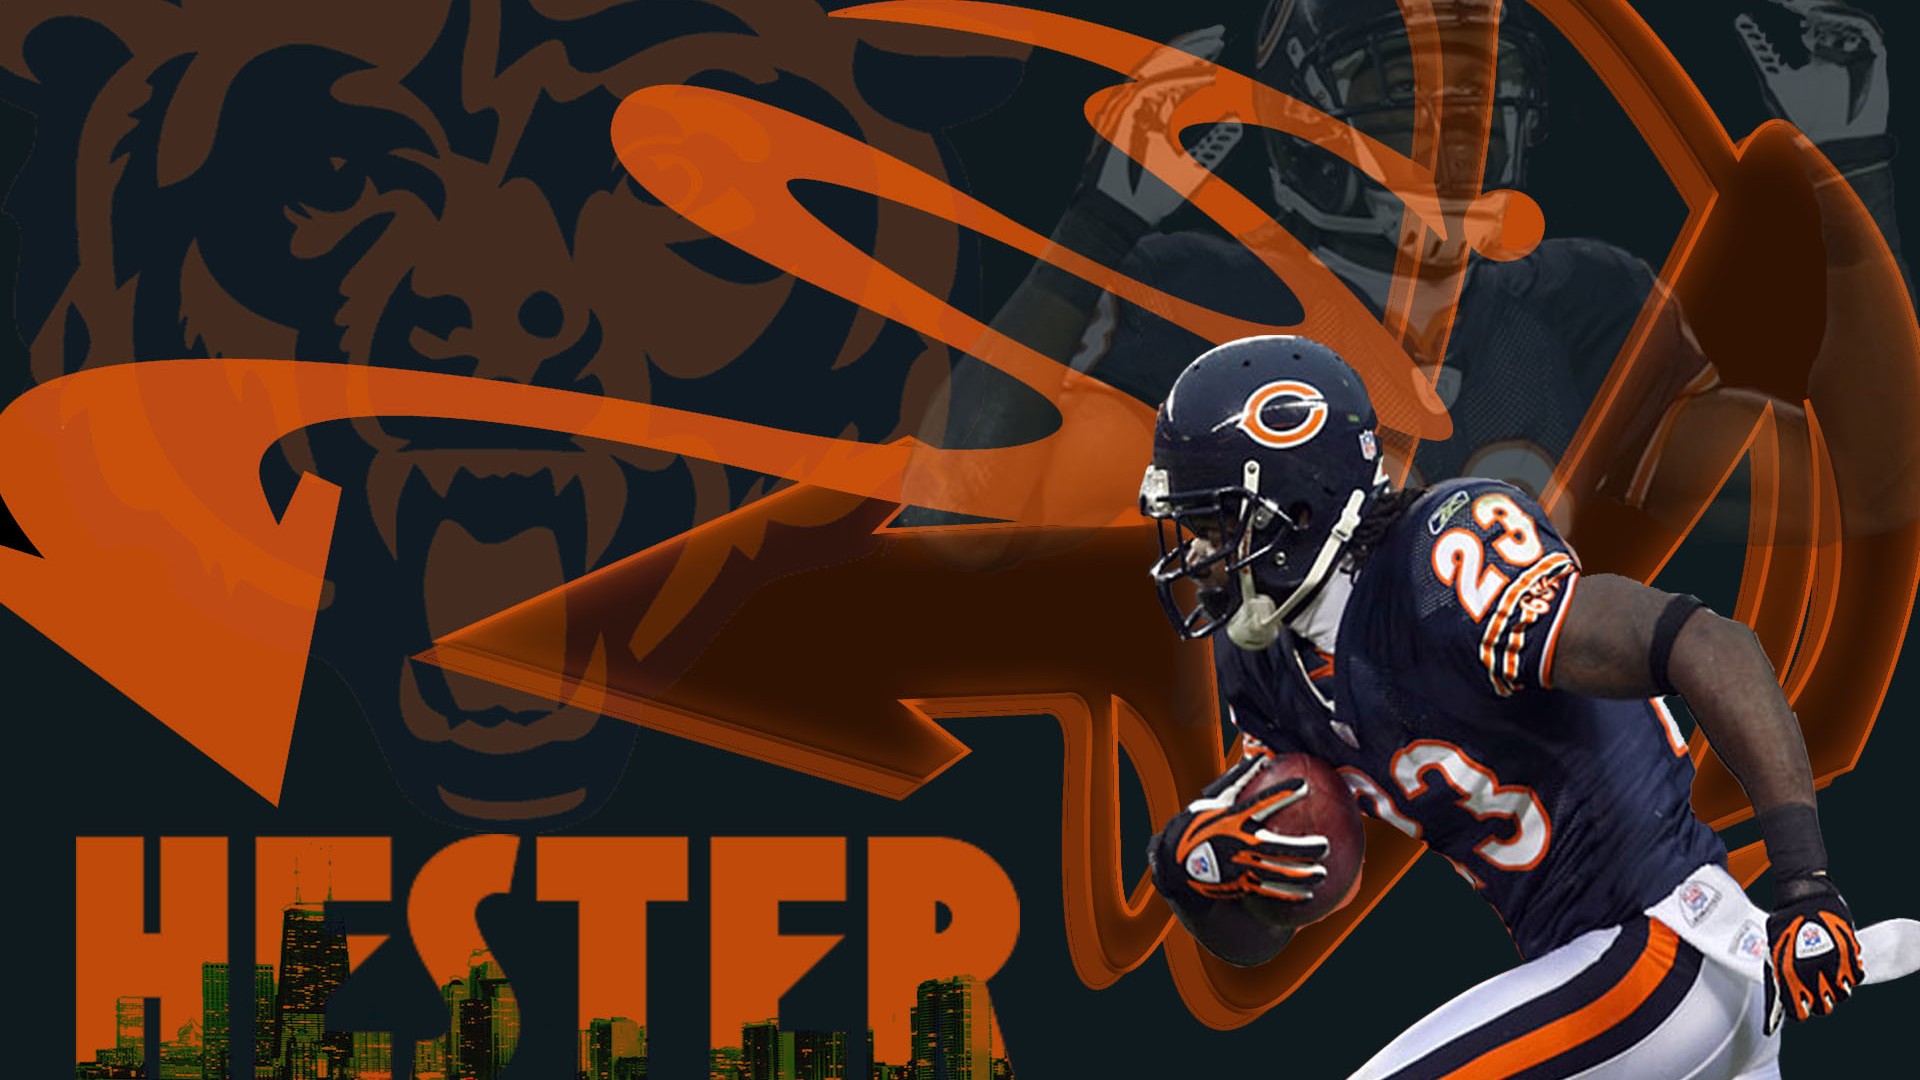 Wallpapers HD Chicago Bears NFL With high-resolution 1920X1080 pixel. You can use this wallpaper for your Mac or Windows Desktop Background, iPhone, Android or Tablet and another Smartphone device